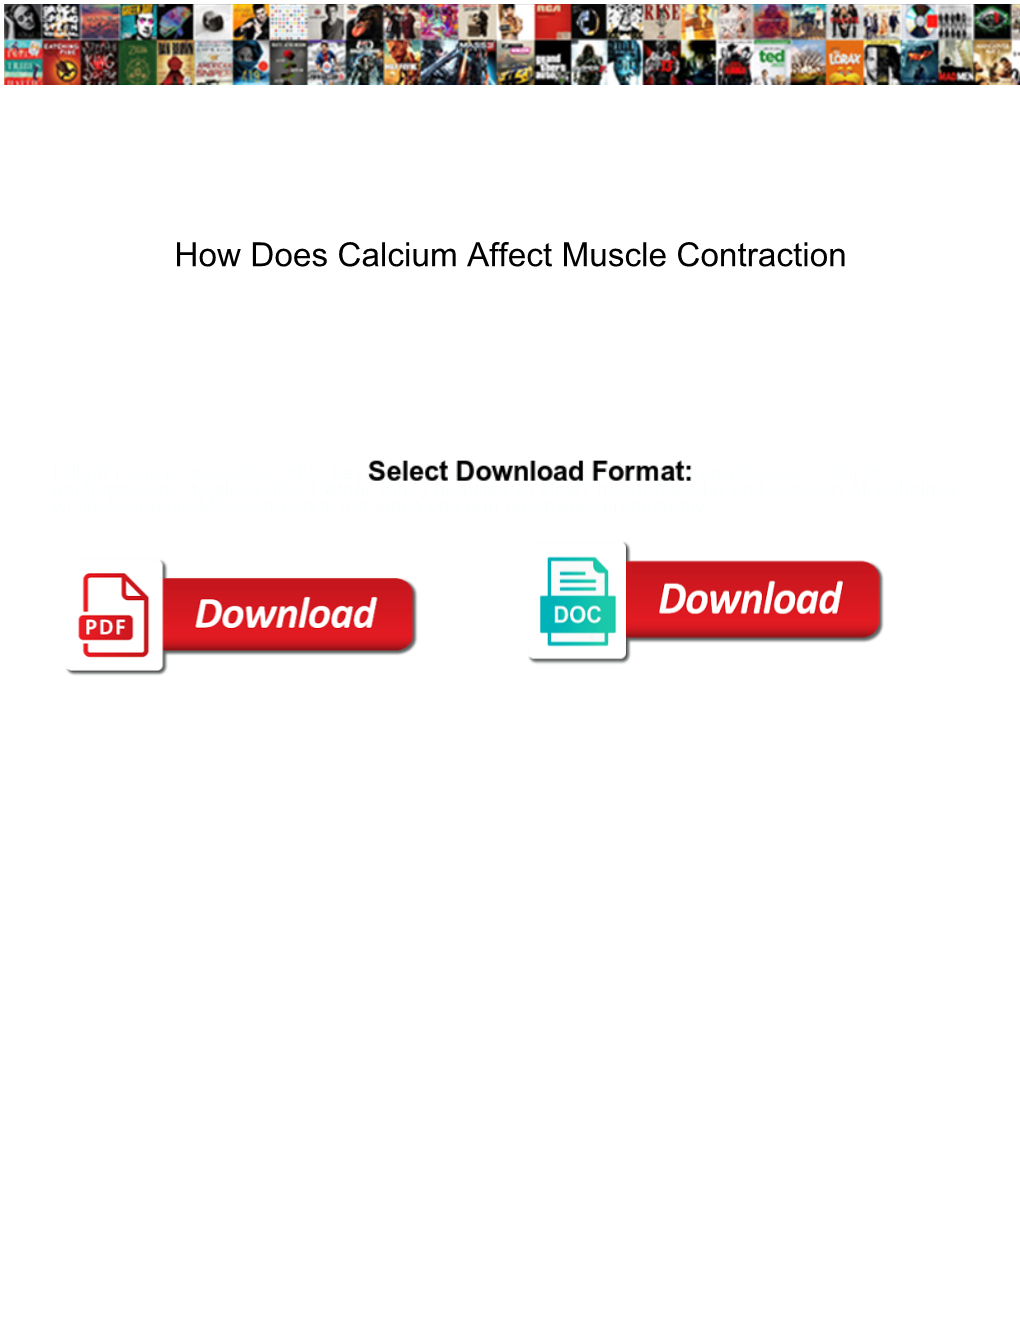 How Does Calcium Affect Muscle Contraction